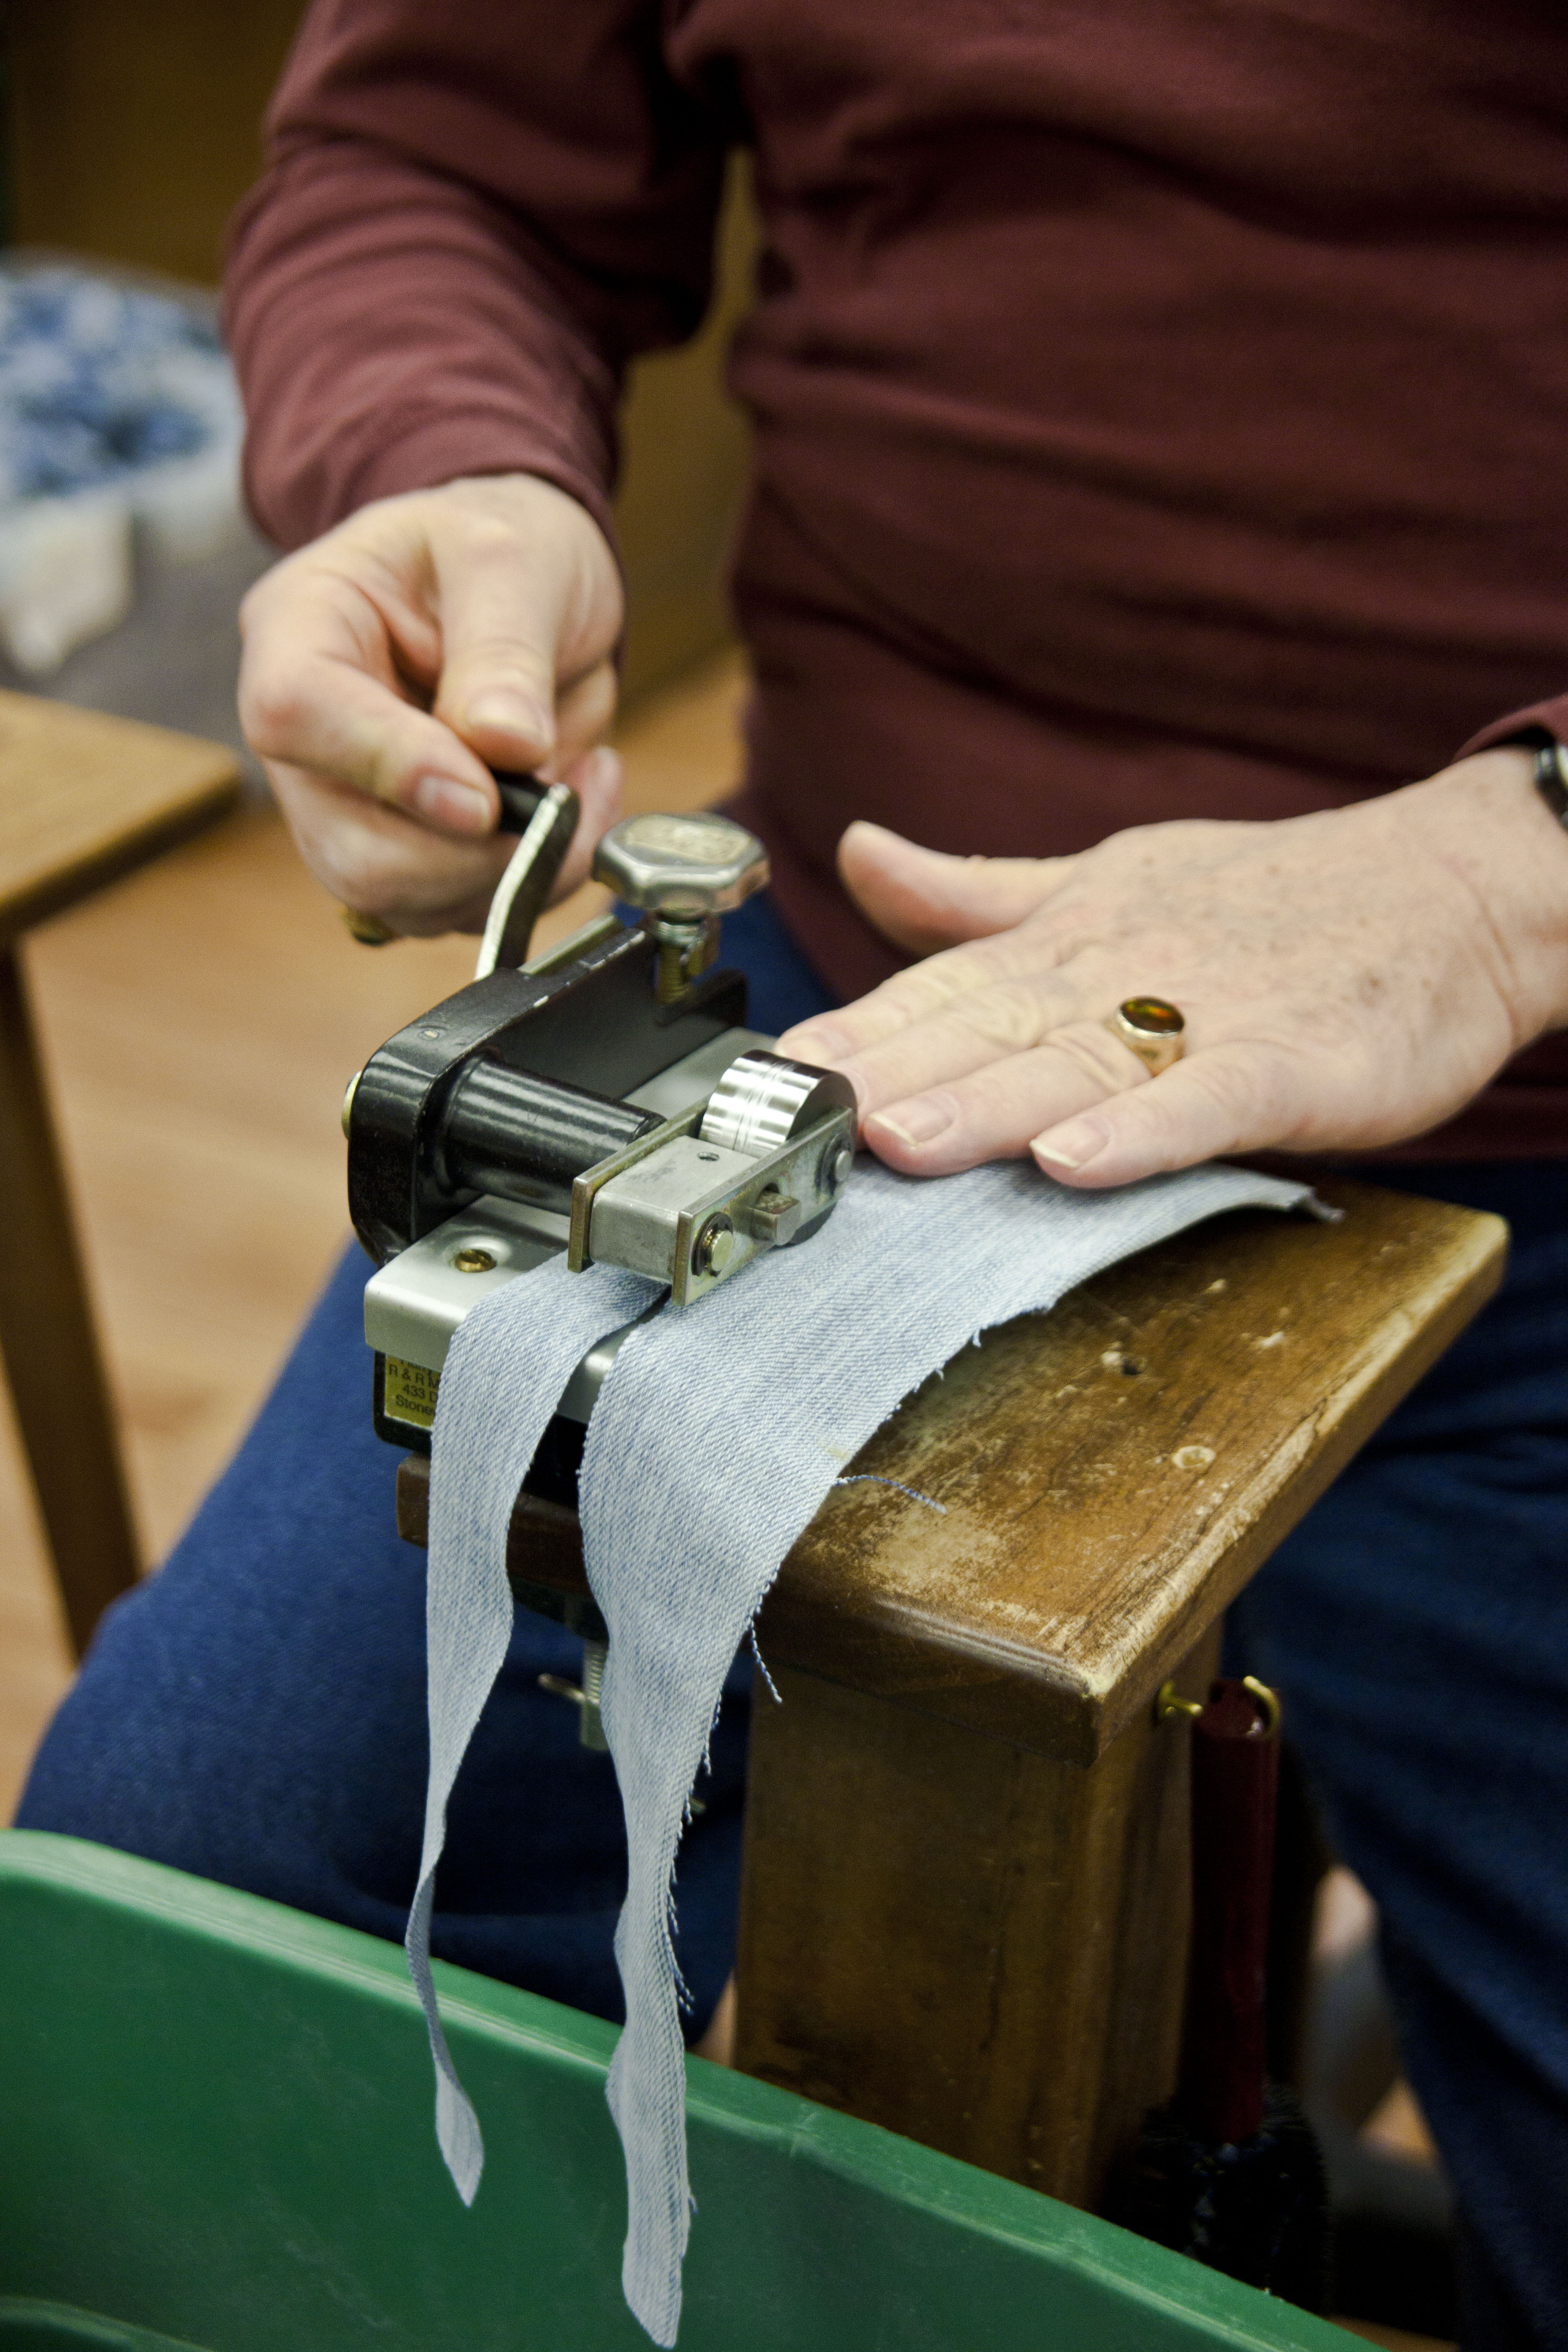 This little machine makes cutting the denim into strips quick and easy.